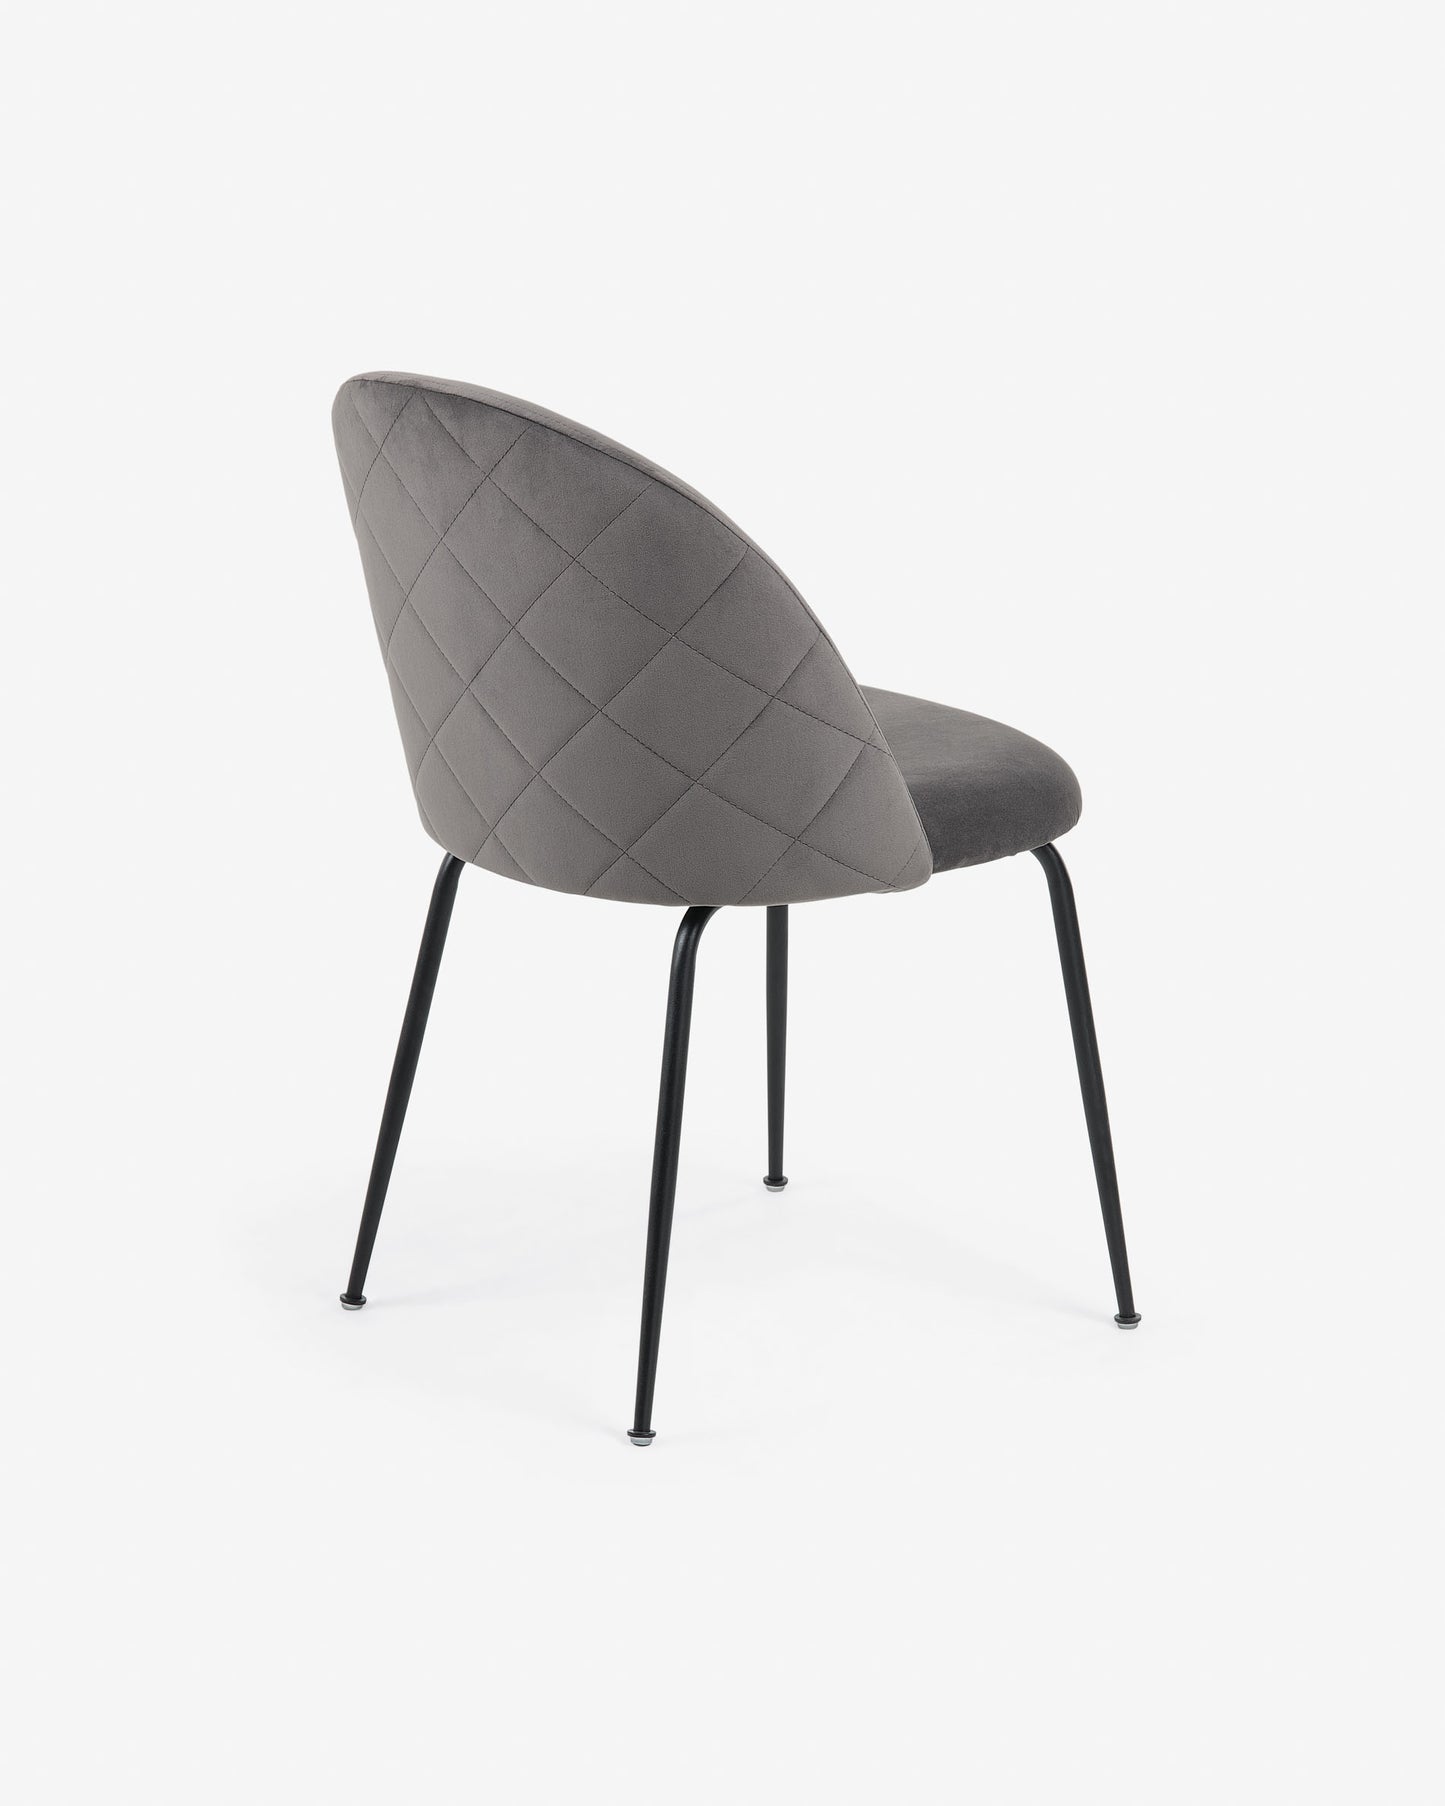 Silla Ivonne terciopelo gris - Kave Home